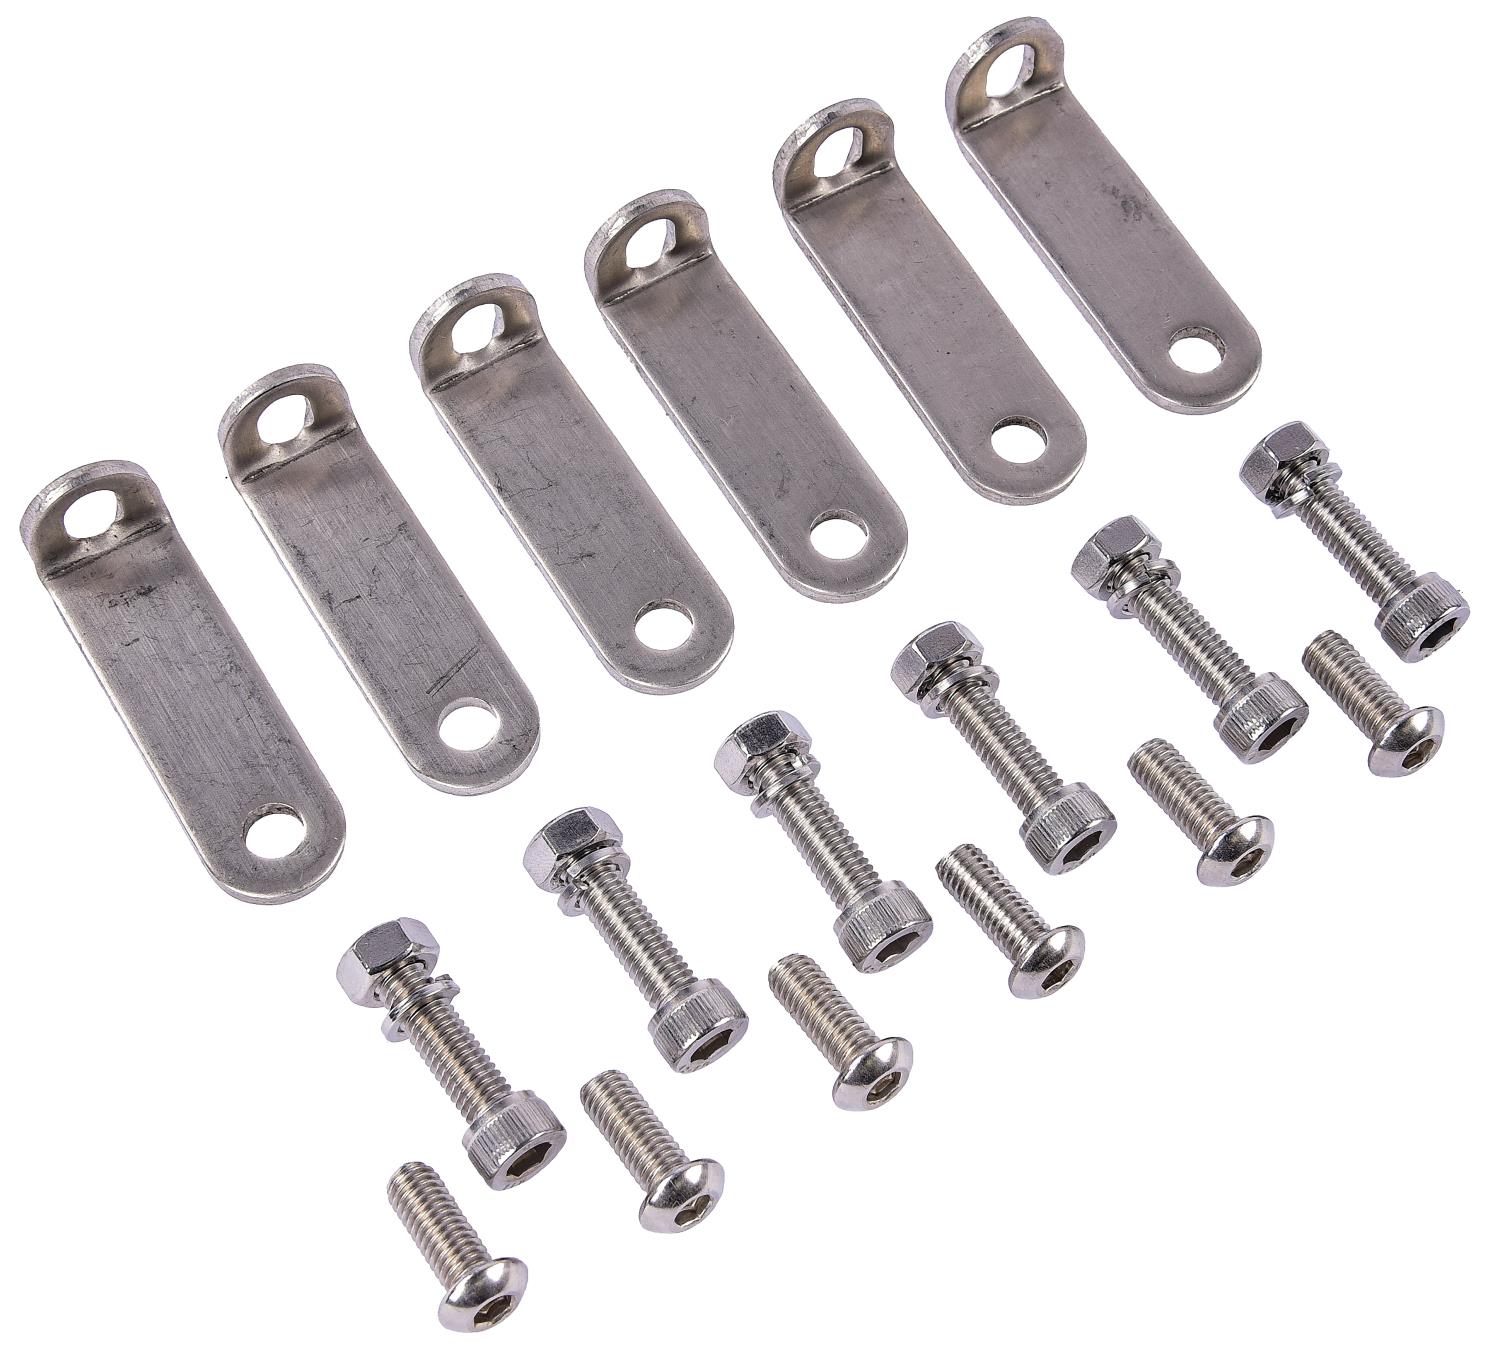 Replacement Fuel Rail Hardware Kit for JEGS Fabricated Intake Manifold for GM LS3, L92